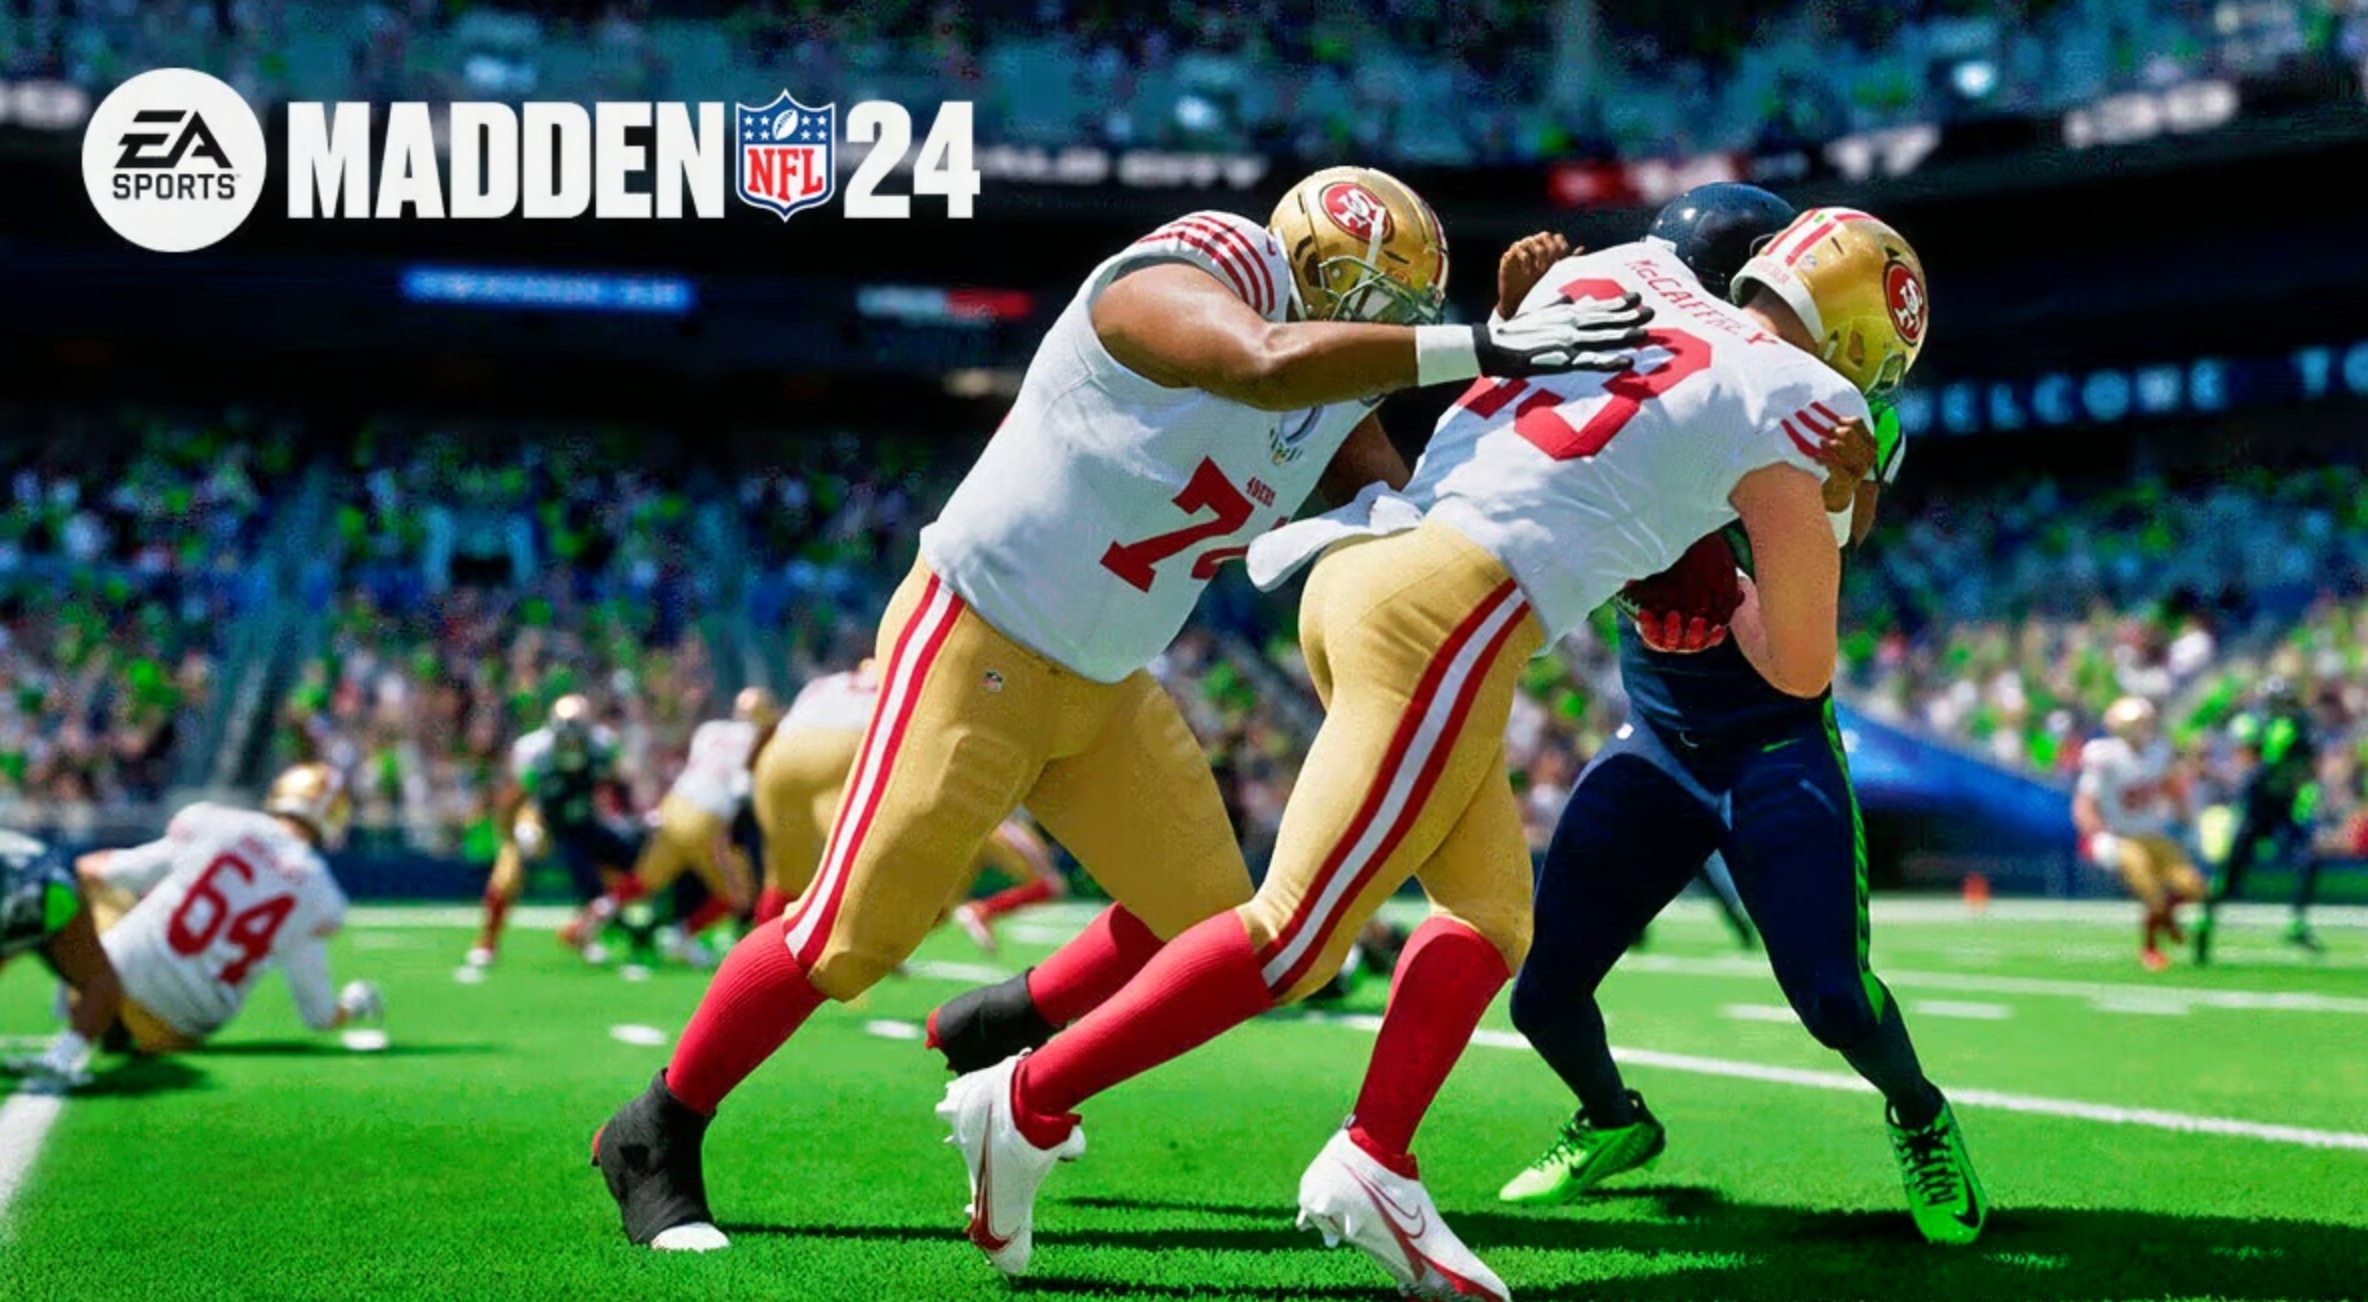 Madden 22 Rating: The Rookie Rating of the Iowa State Football Team